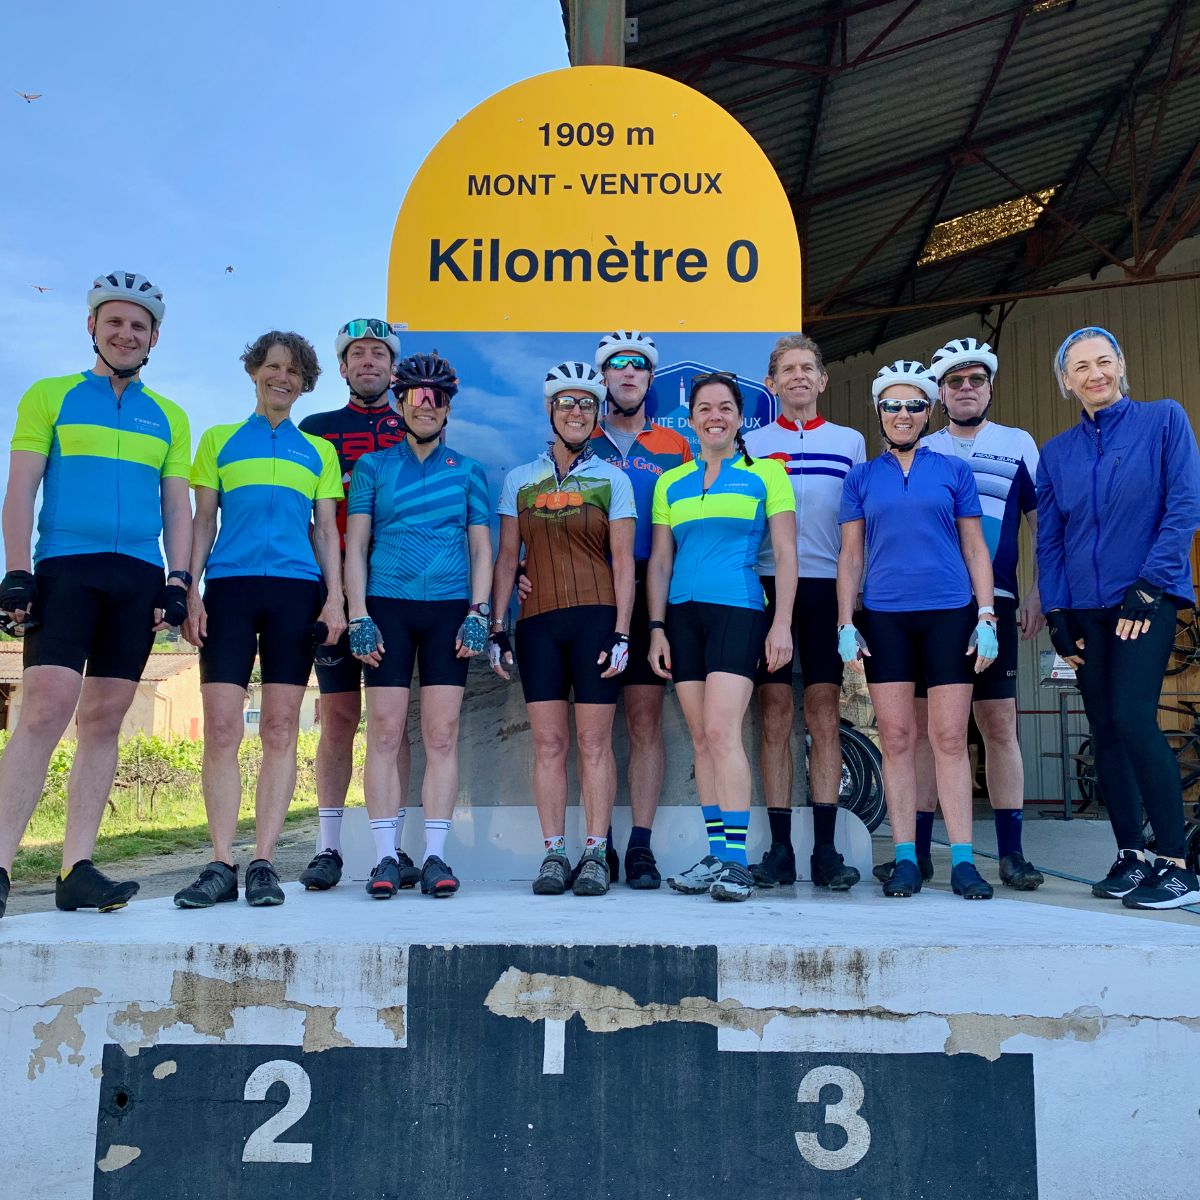 group of people standing on a podium with their bike helmets on